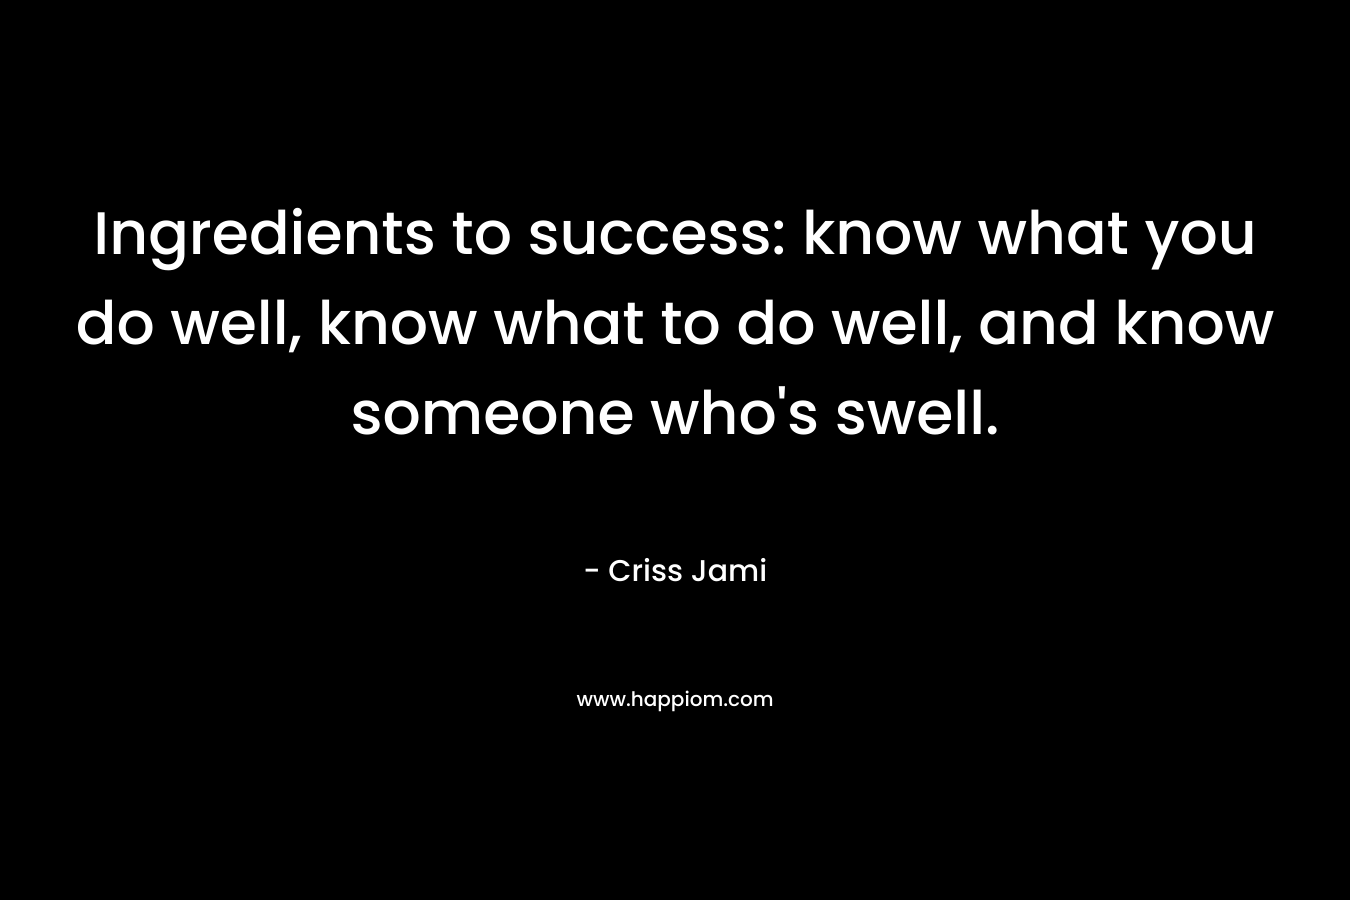 Ingredients to success: know what you do well, know what to do well, and know someone who’s swell. – Criss Jami